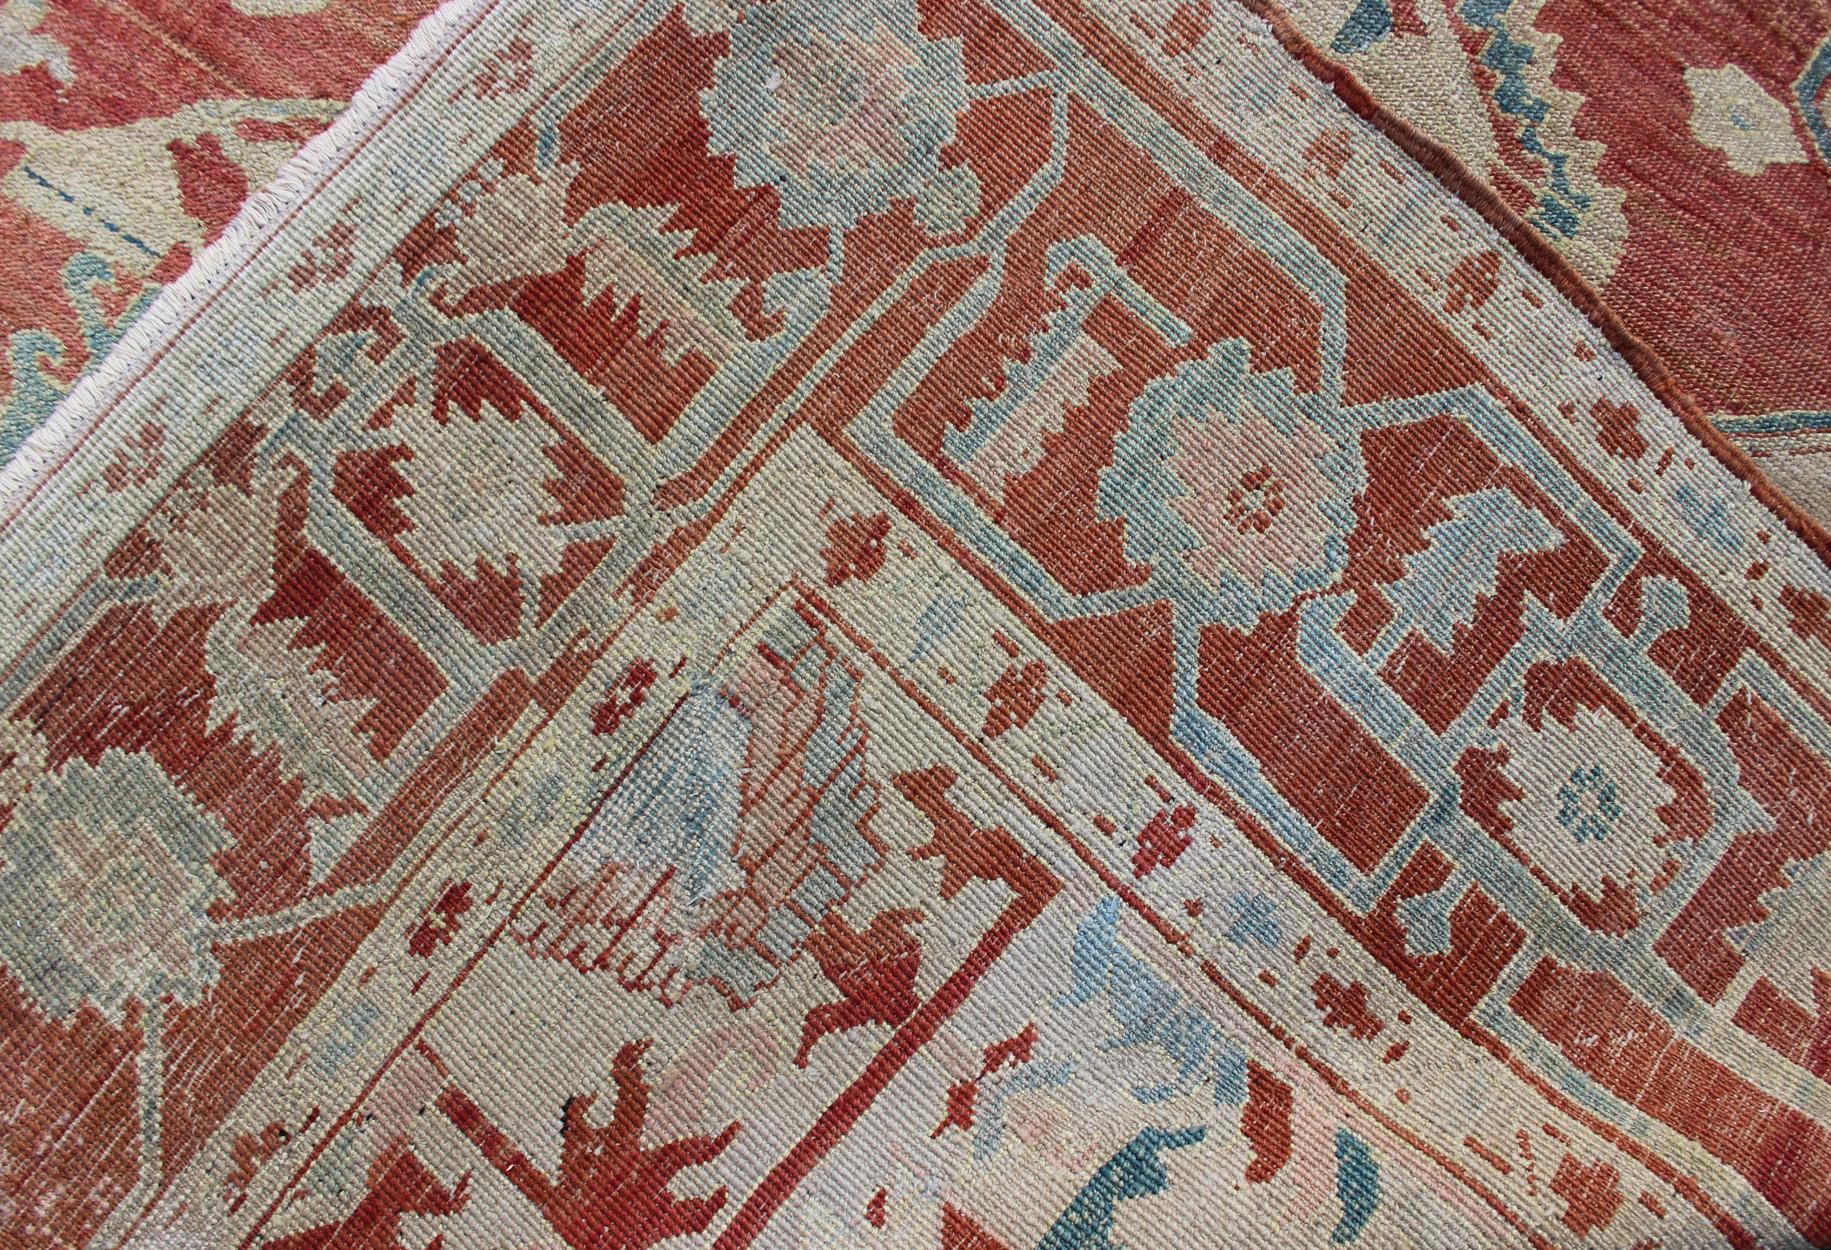 Antique Persian Large Serapi Rug in Soft Red, Taupe, Light Teal and Blue For Sale 6